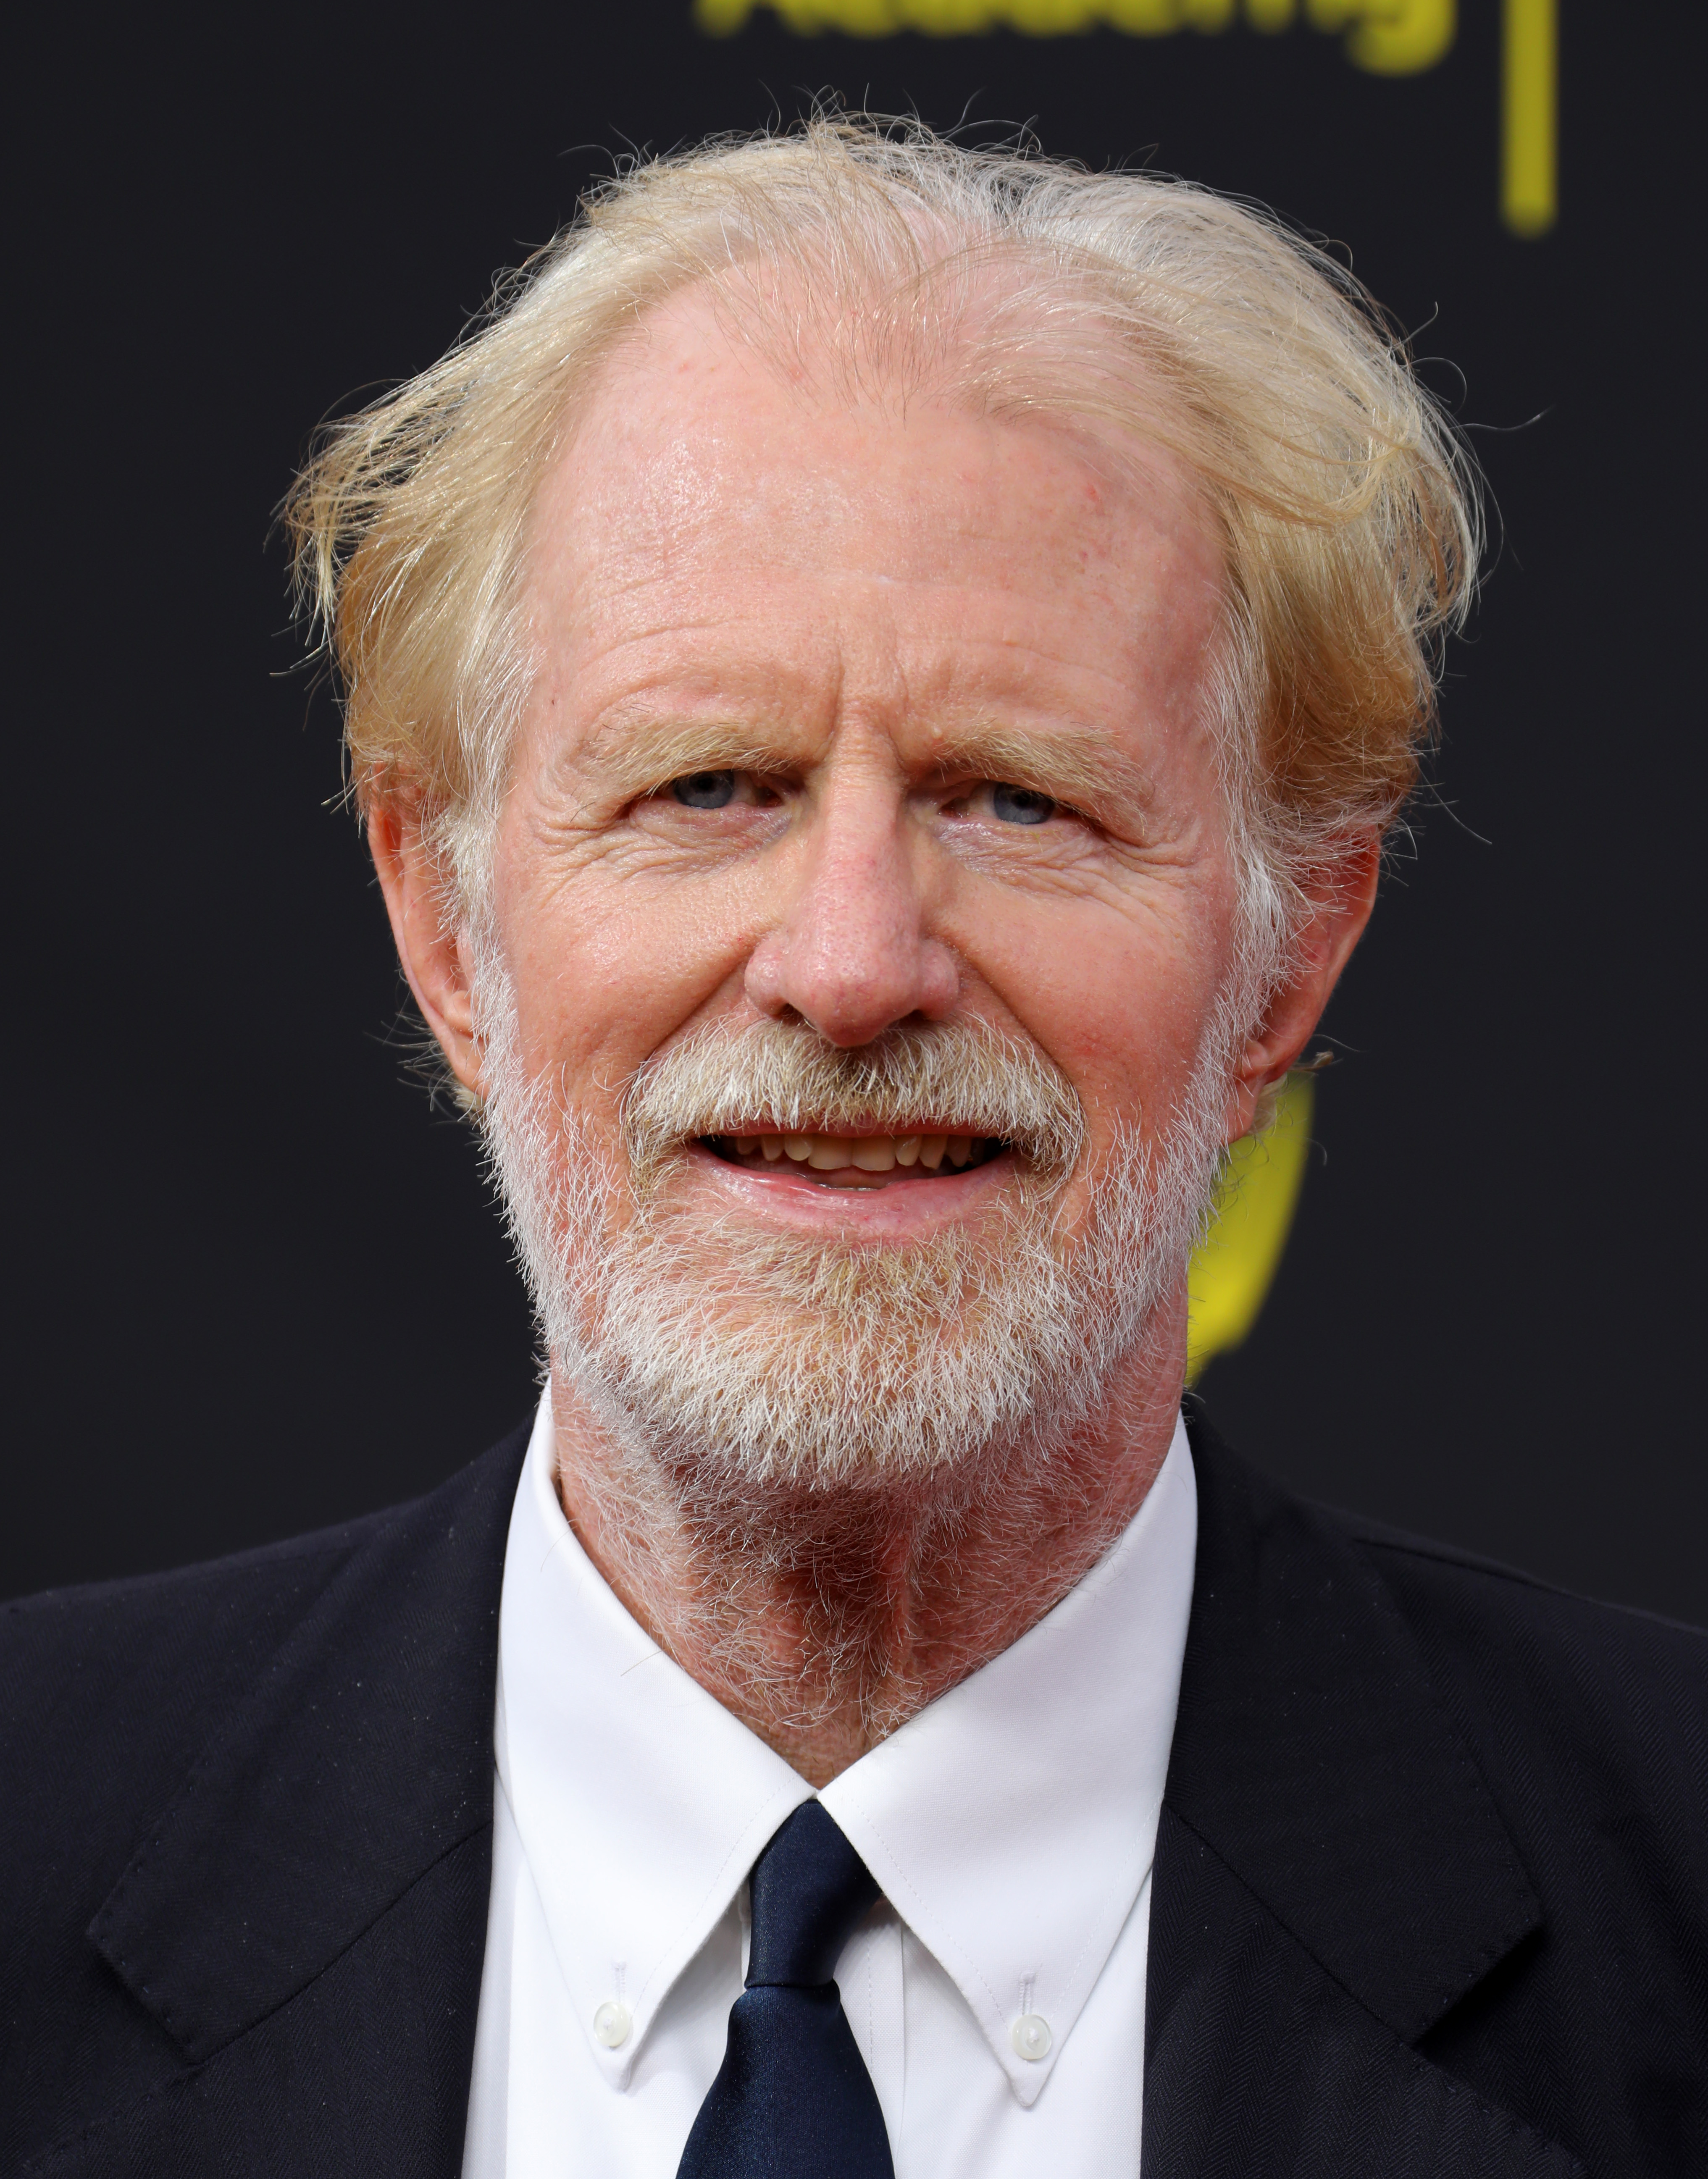 Ed Begley Jr. at the Creative Arts Emmy Awards in Los Angeles, California on September 15, 2019 | Source: Getty Images